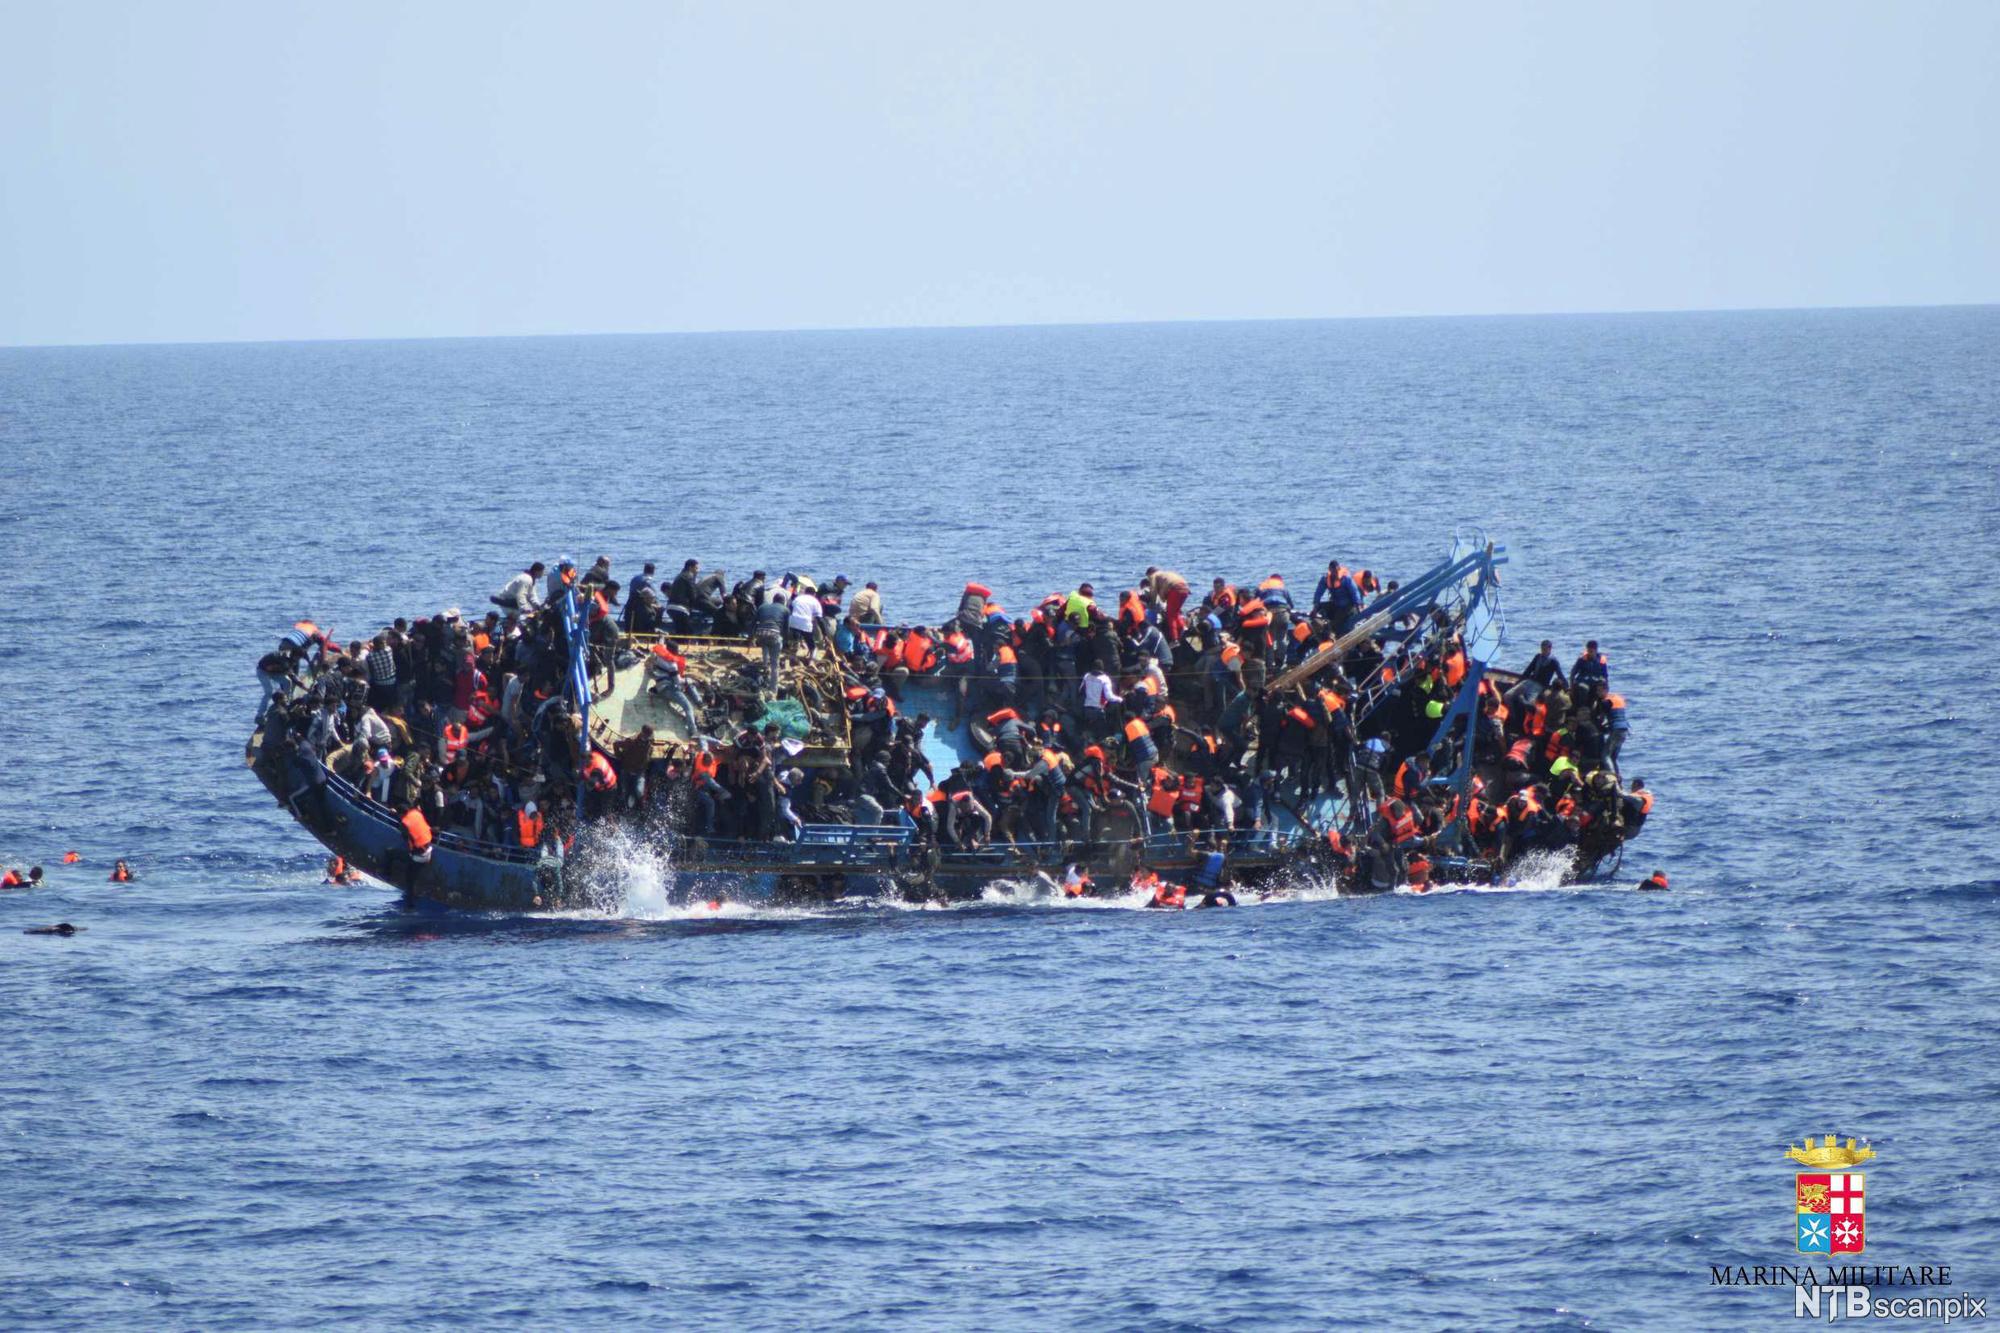 A boat filled with people capsizing in open ocean